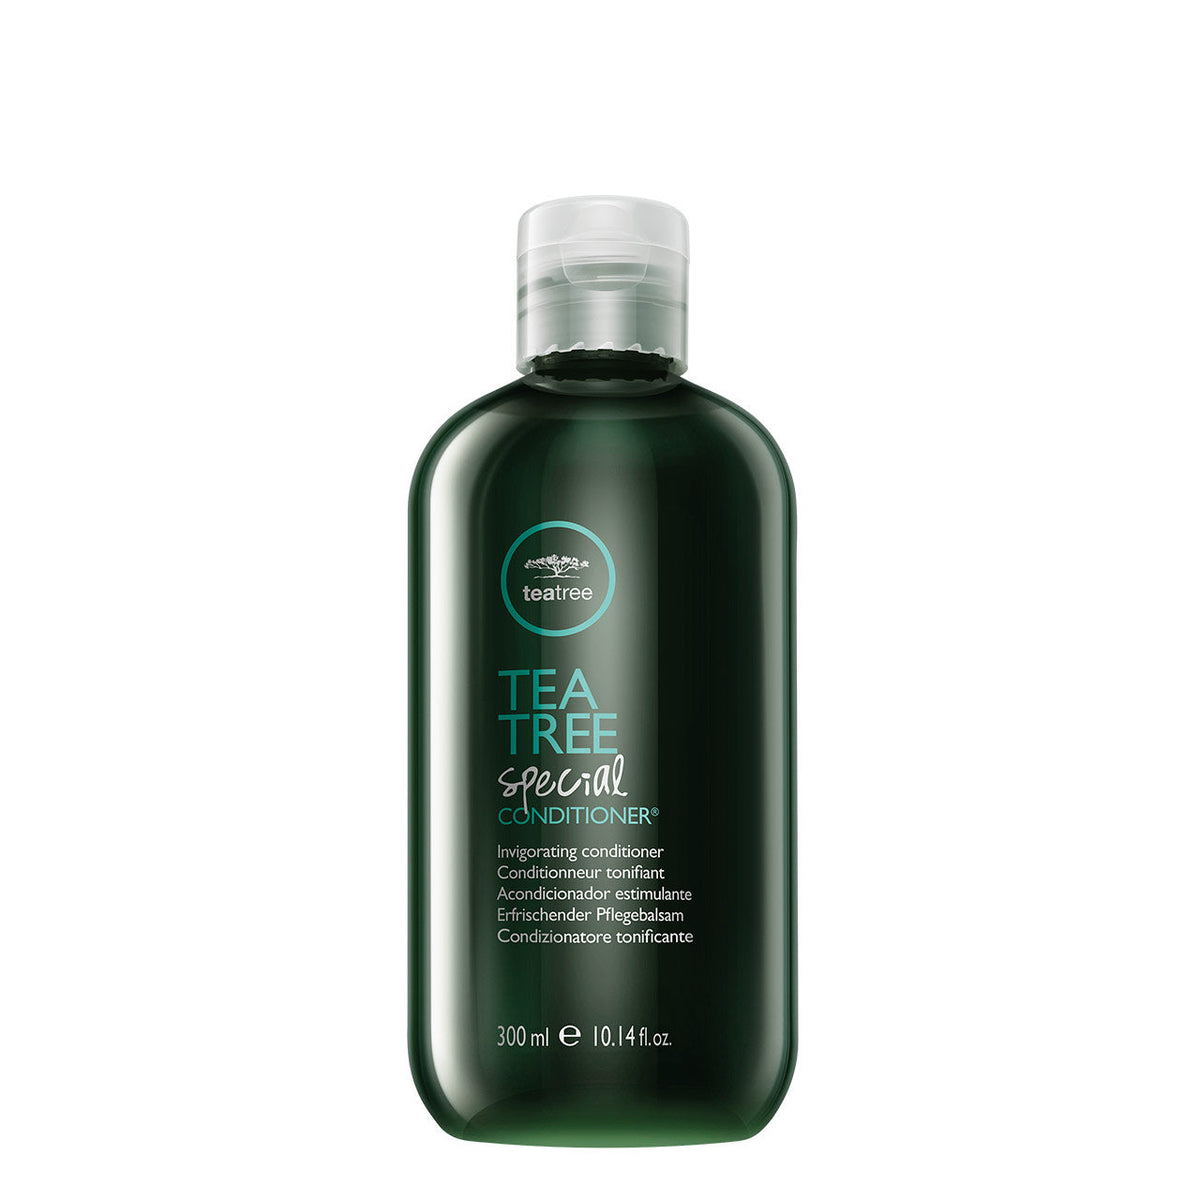 Tea Tree Special Conditioner - 300ML - by Paul Mitchell |ProCare Outlet|